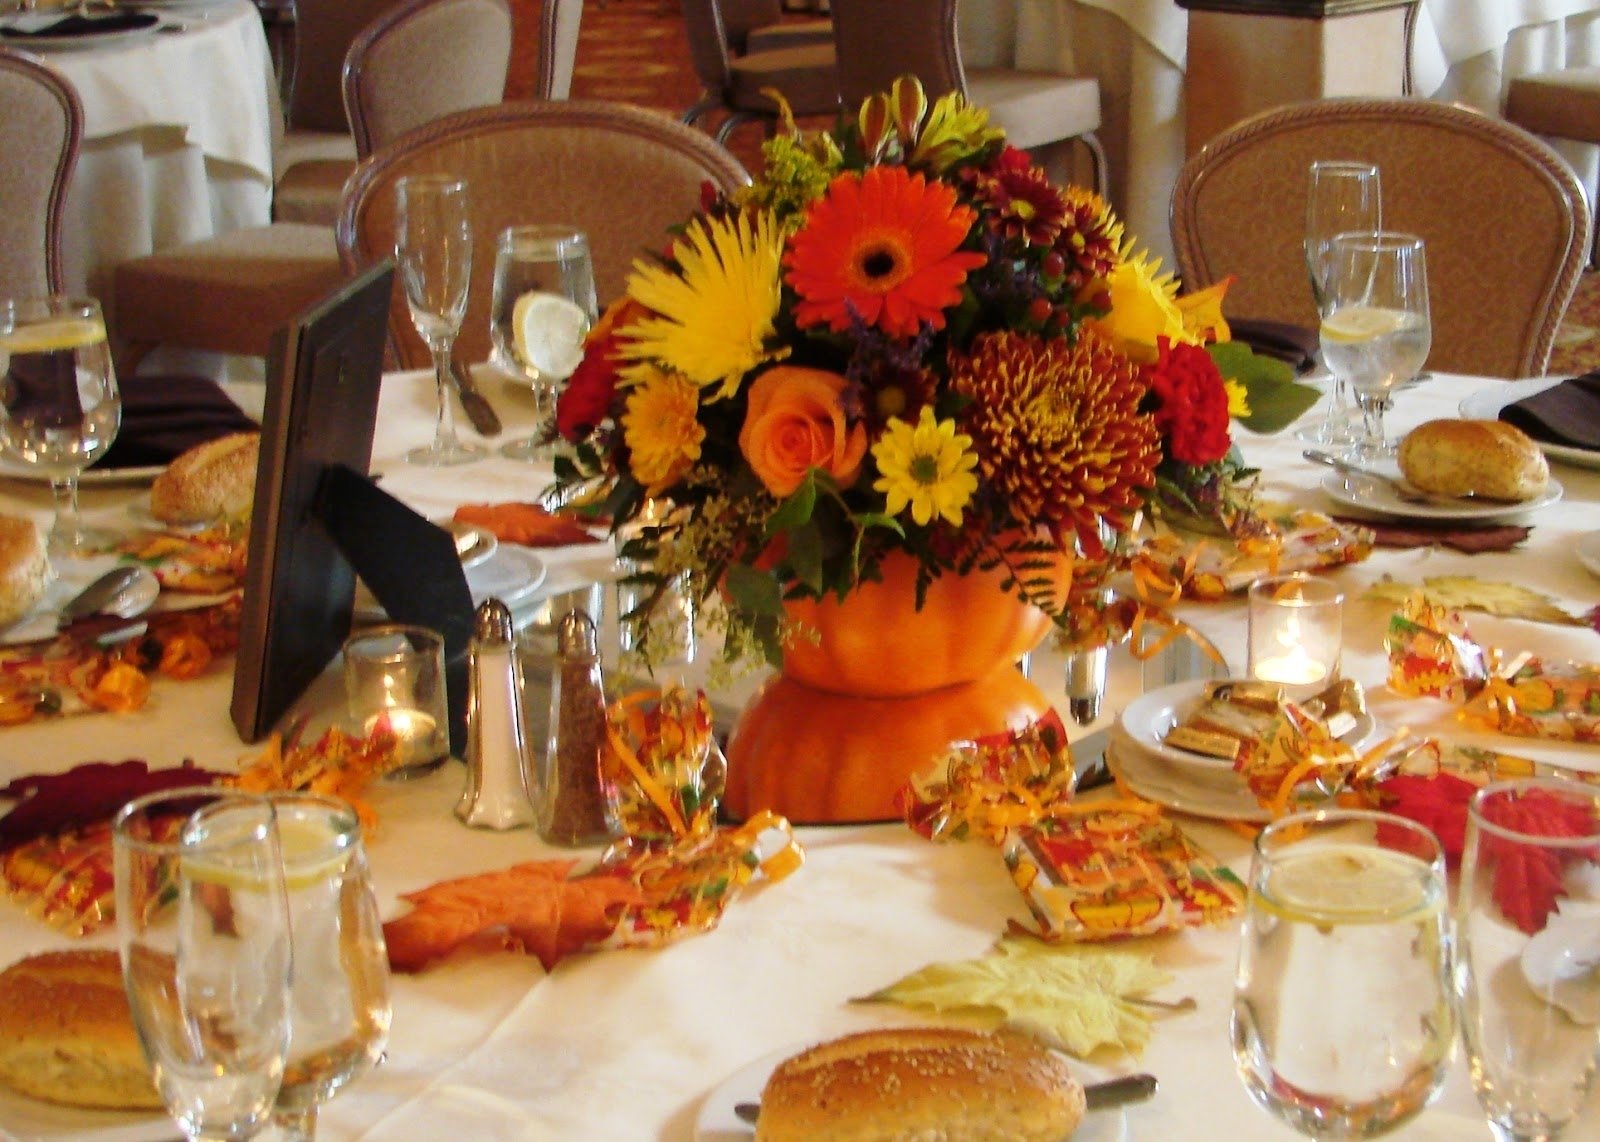 10 Fabulous Fall Wedding Centerpiece Ideas On A Budget new ideas cheap wedding decorations for tables with themed fall 2022